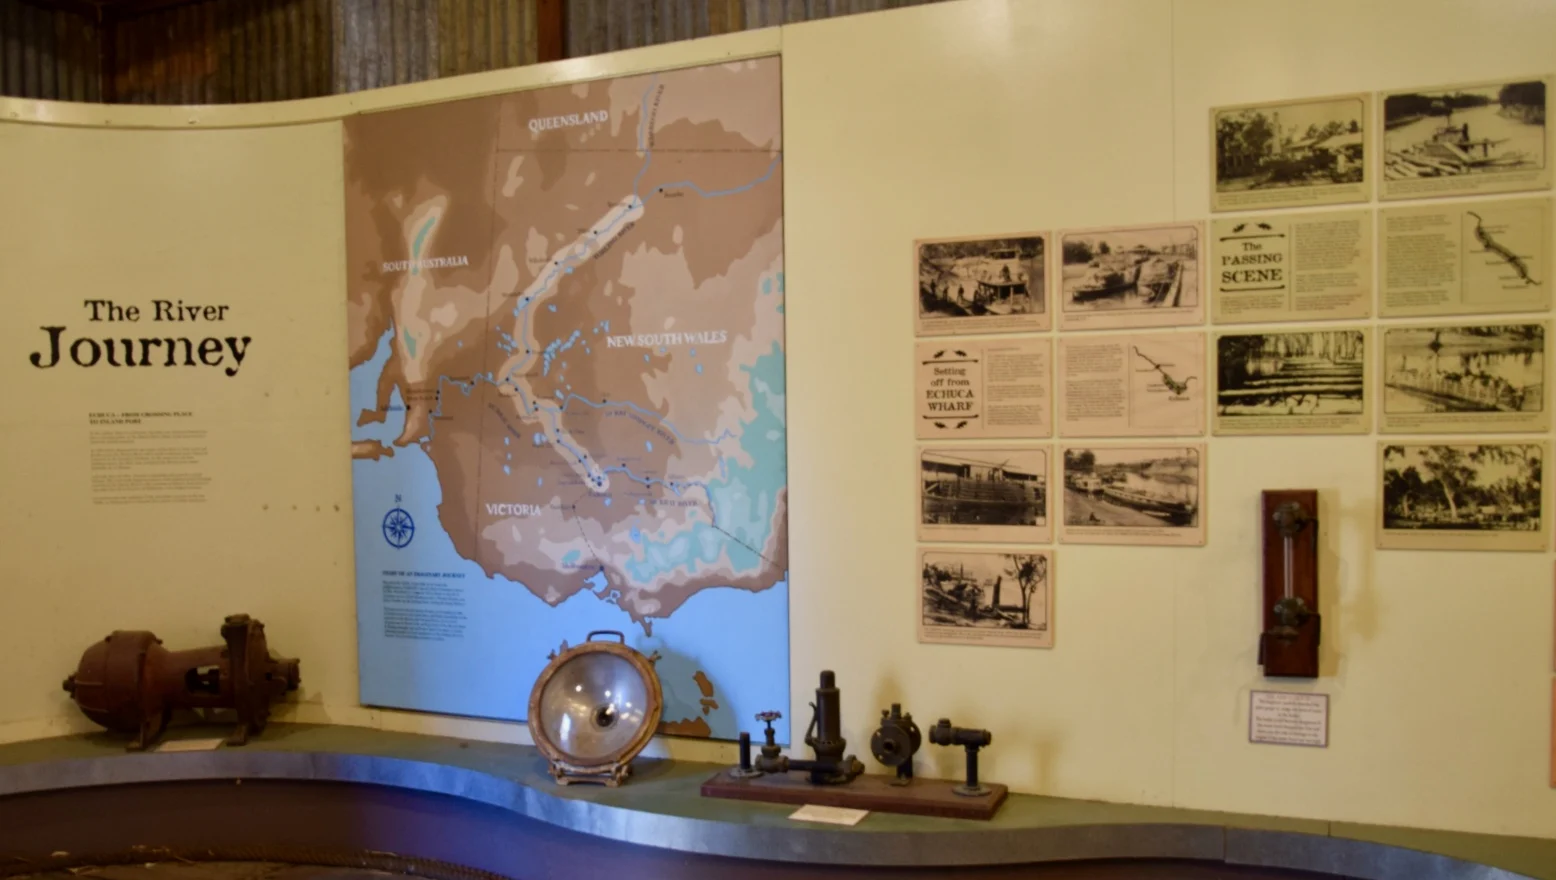 Display at Echuca Discovery Centre showing a map of the River Murray